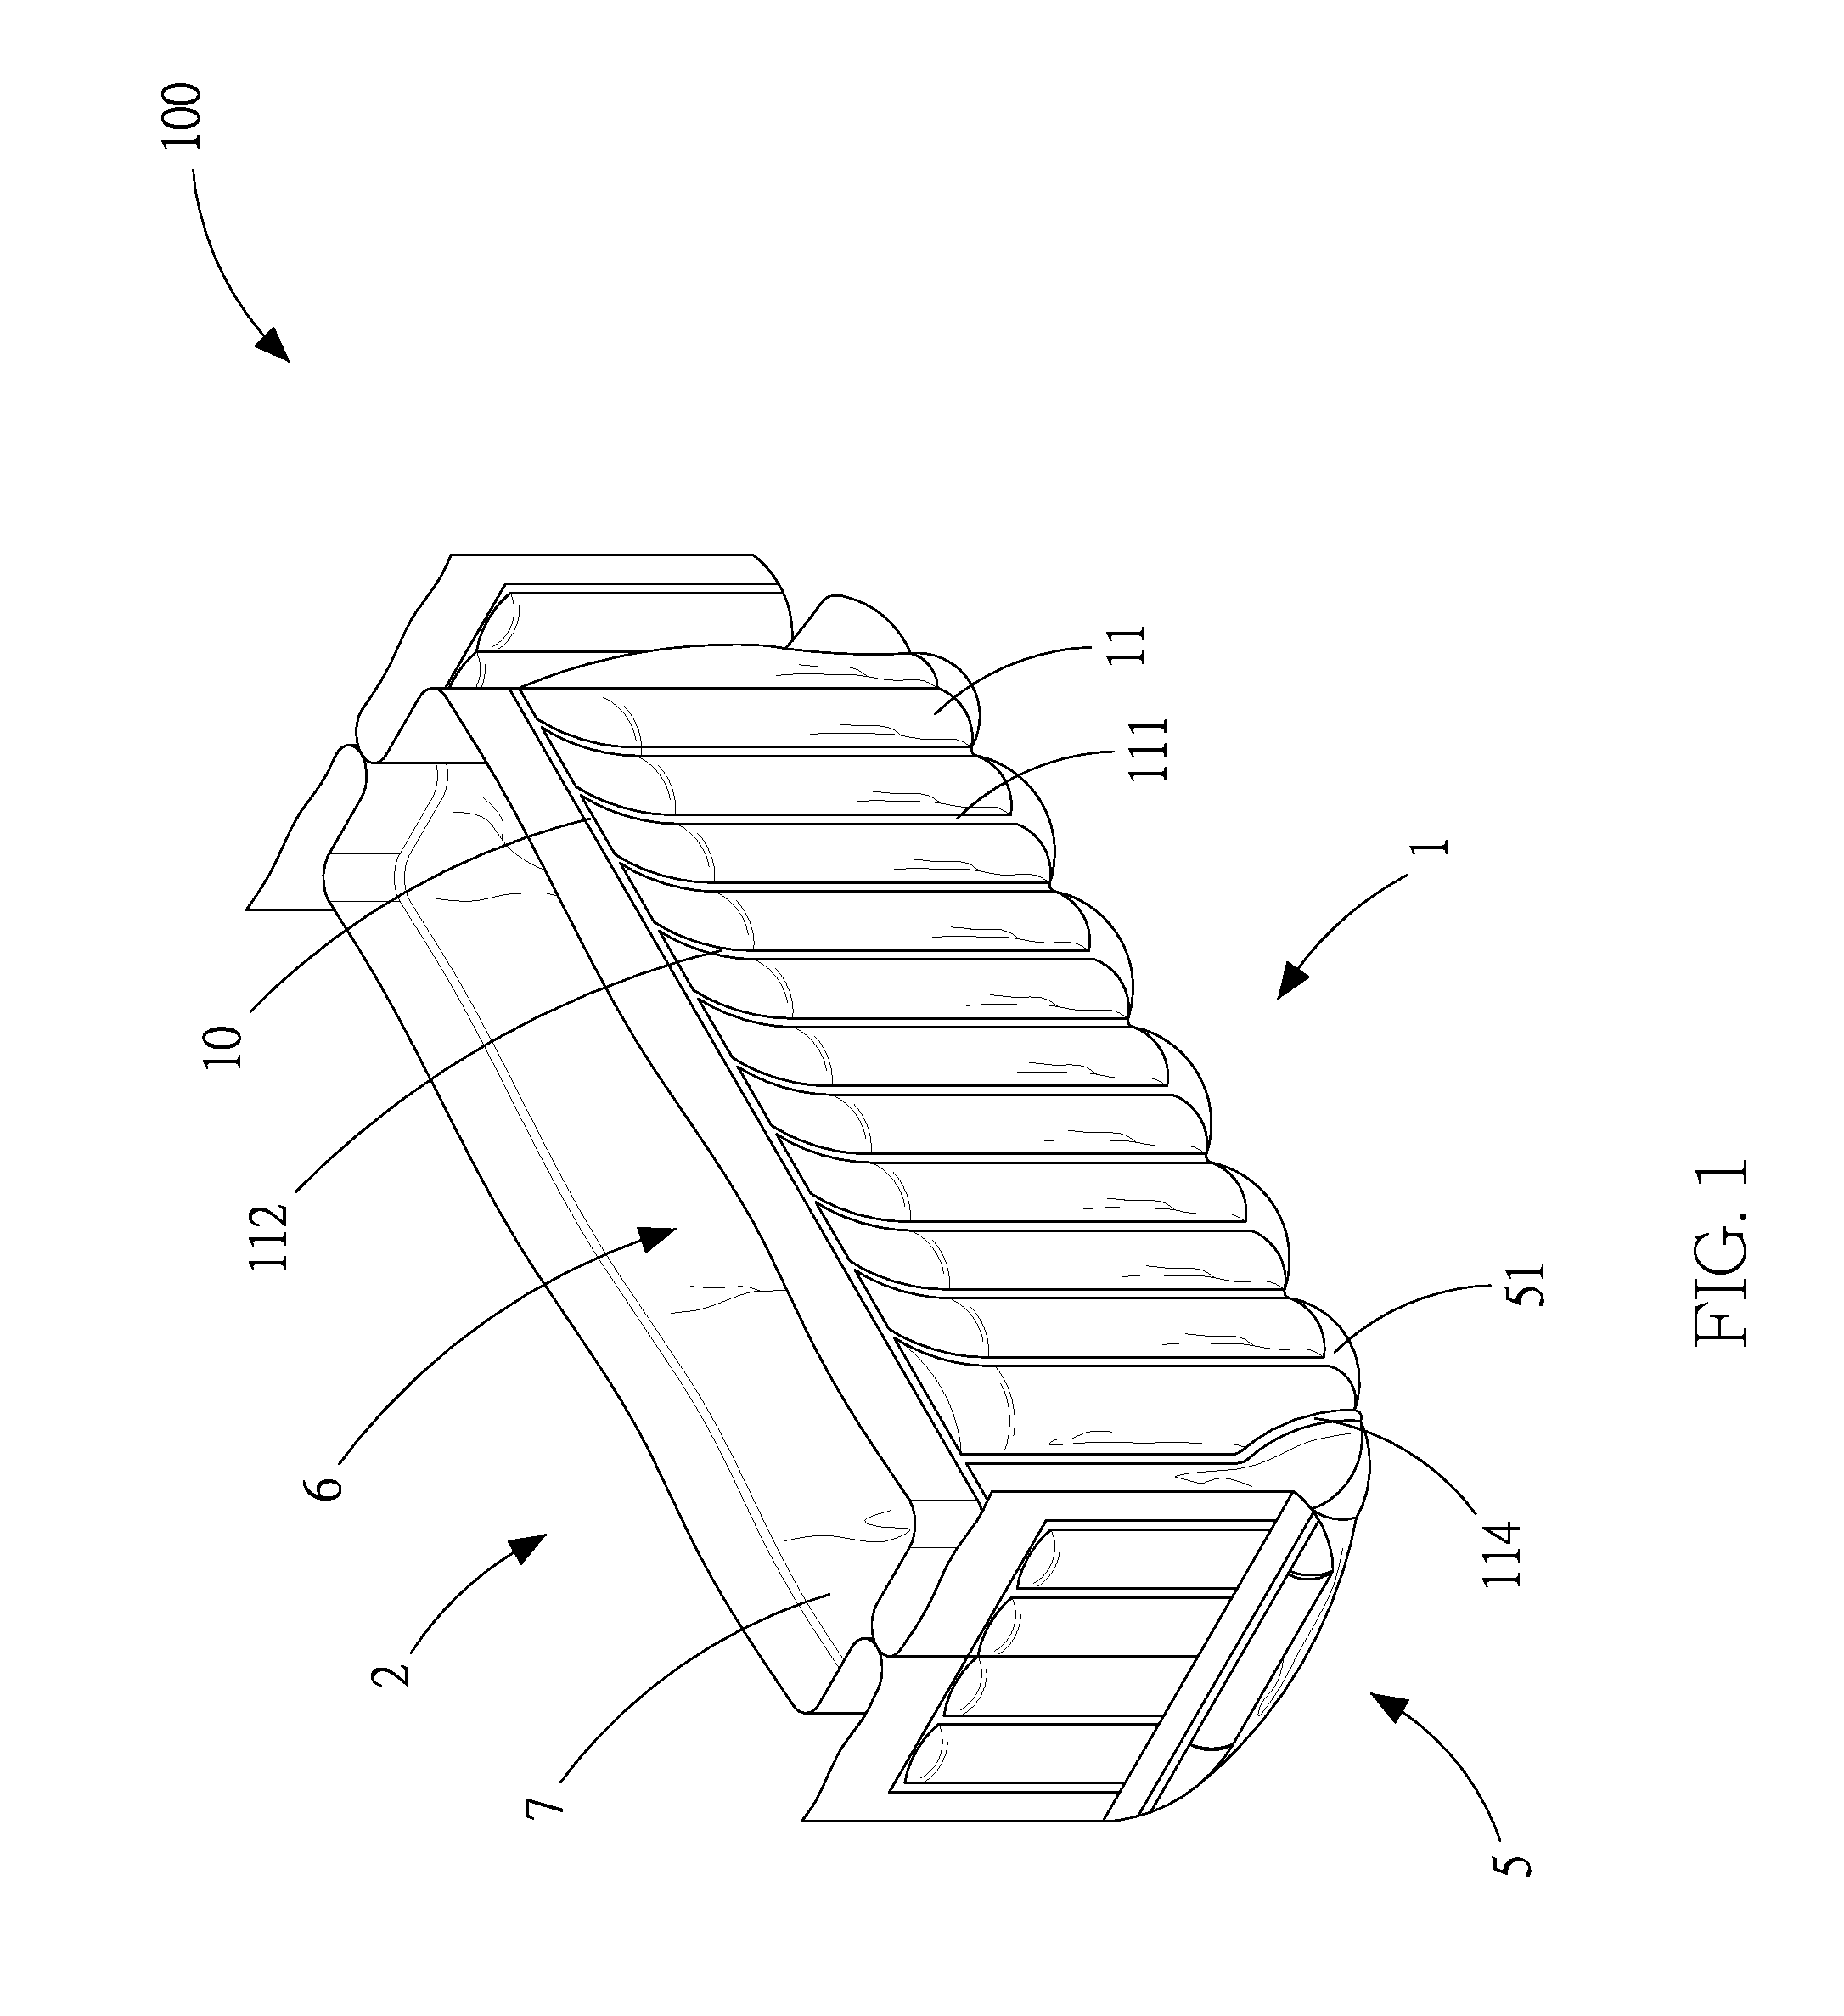 Vibration-absorbing air sheath having improved end-closing structure